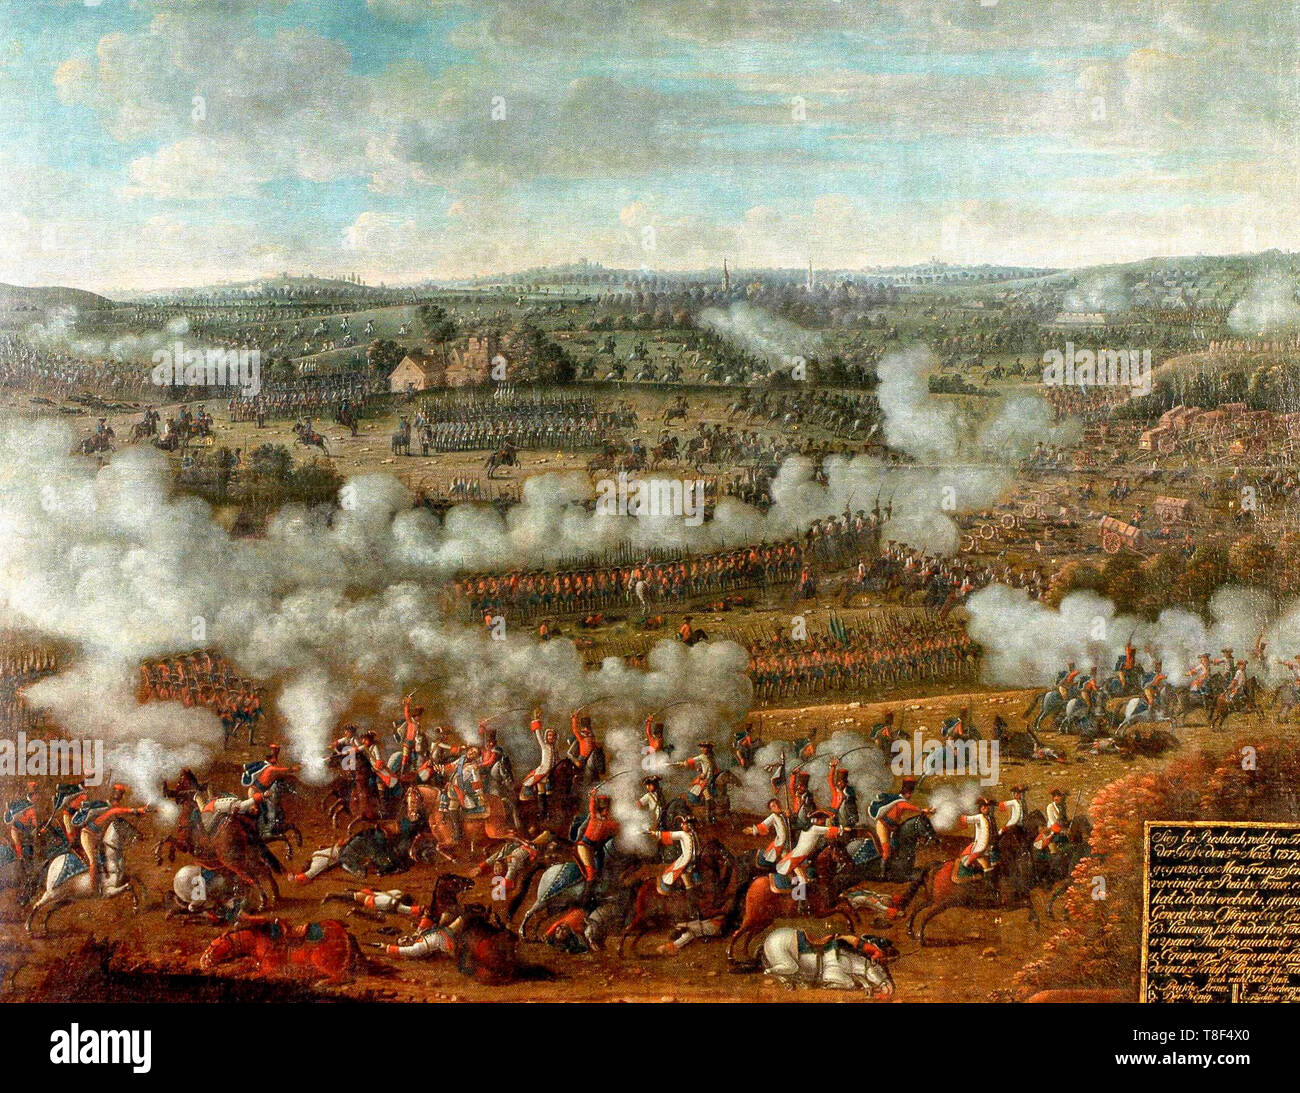 The Battle of Rossbach took place on 5 November 1757 during the Third Silesian War near the village of Rossbach, in the Electorate of Saxony. Stock Photo